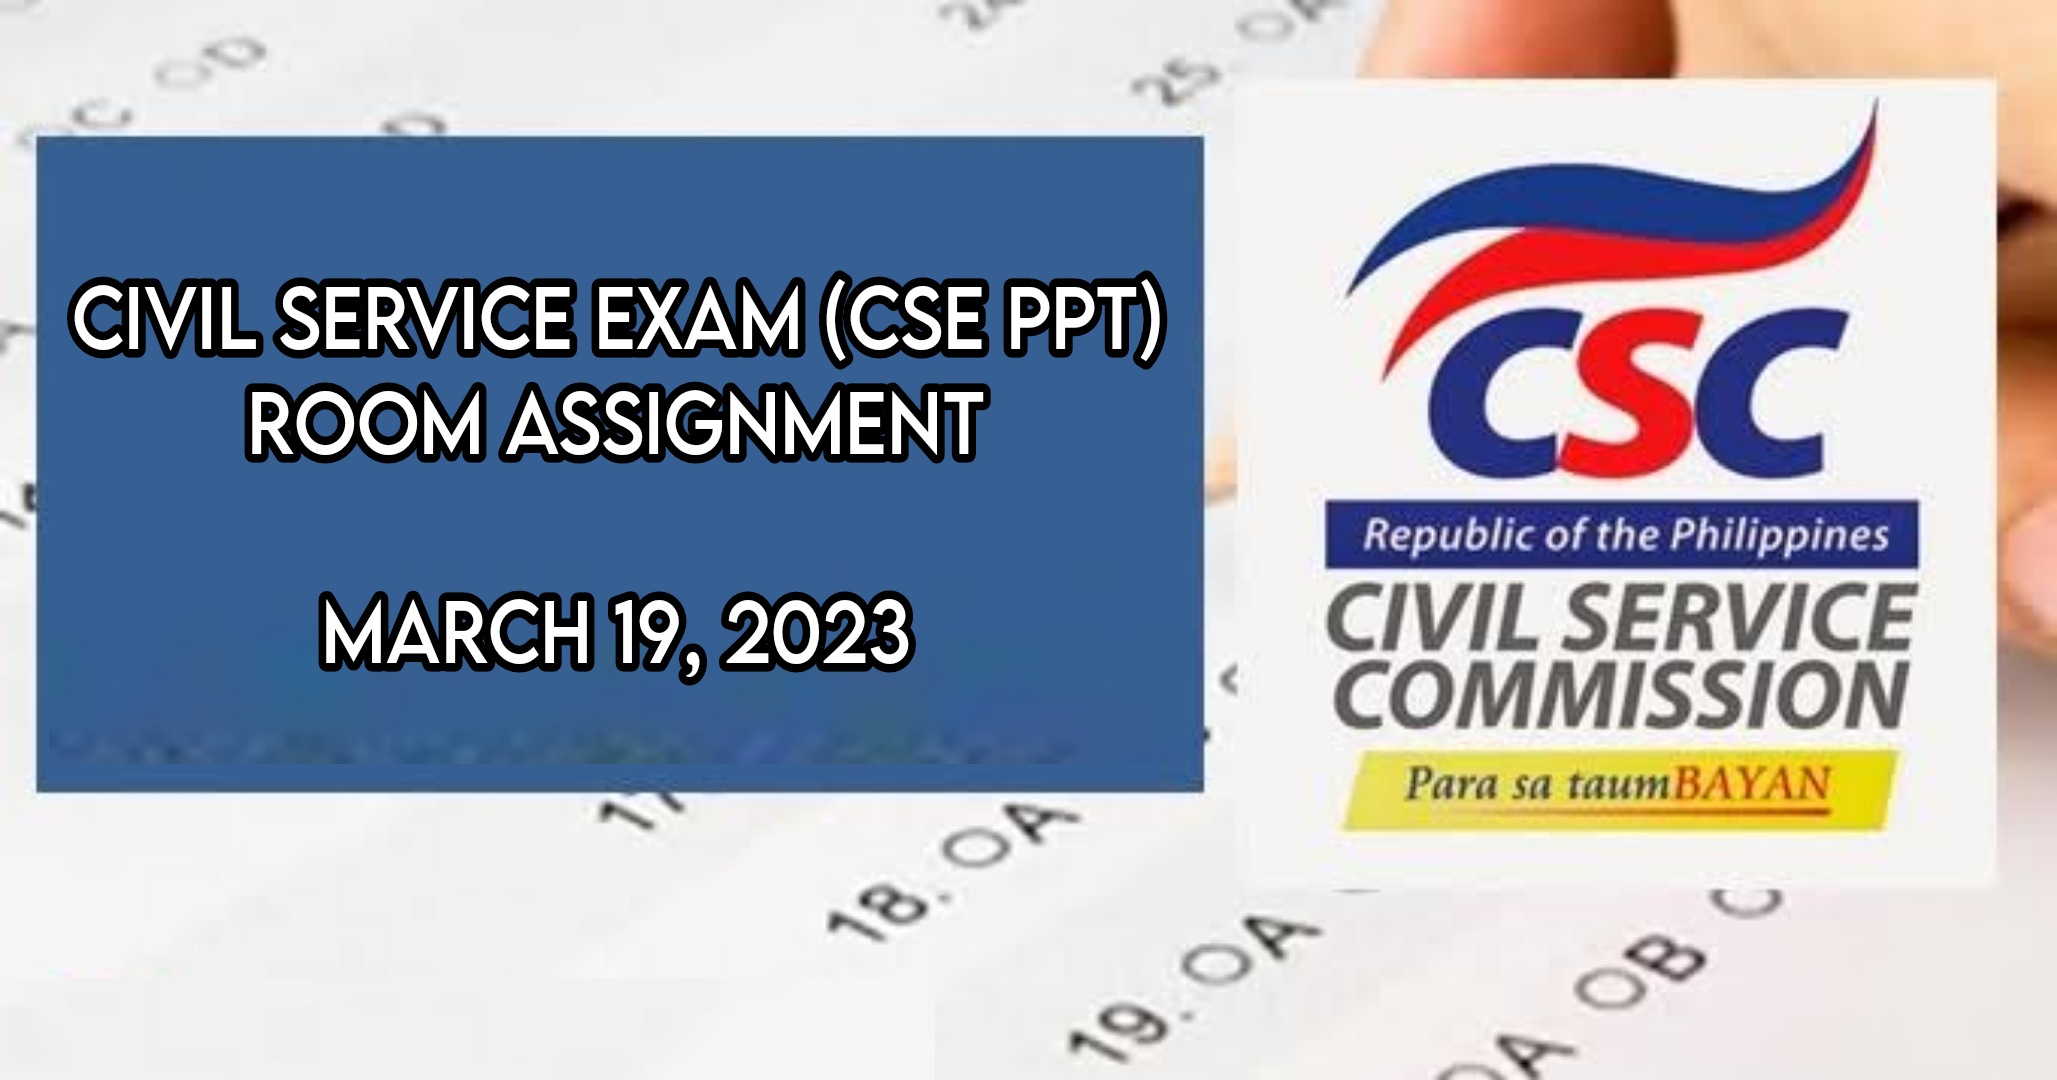 room assignment csc march 26 2023 ncr